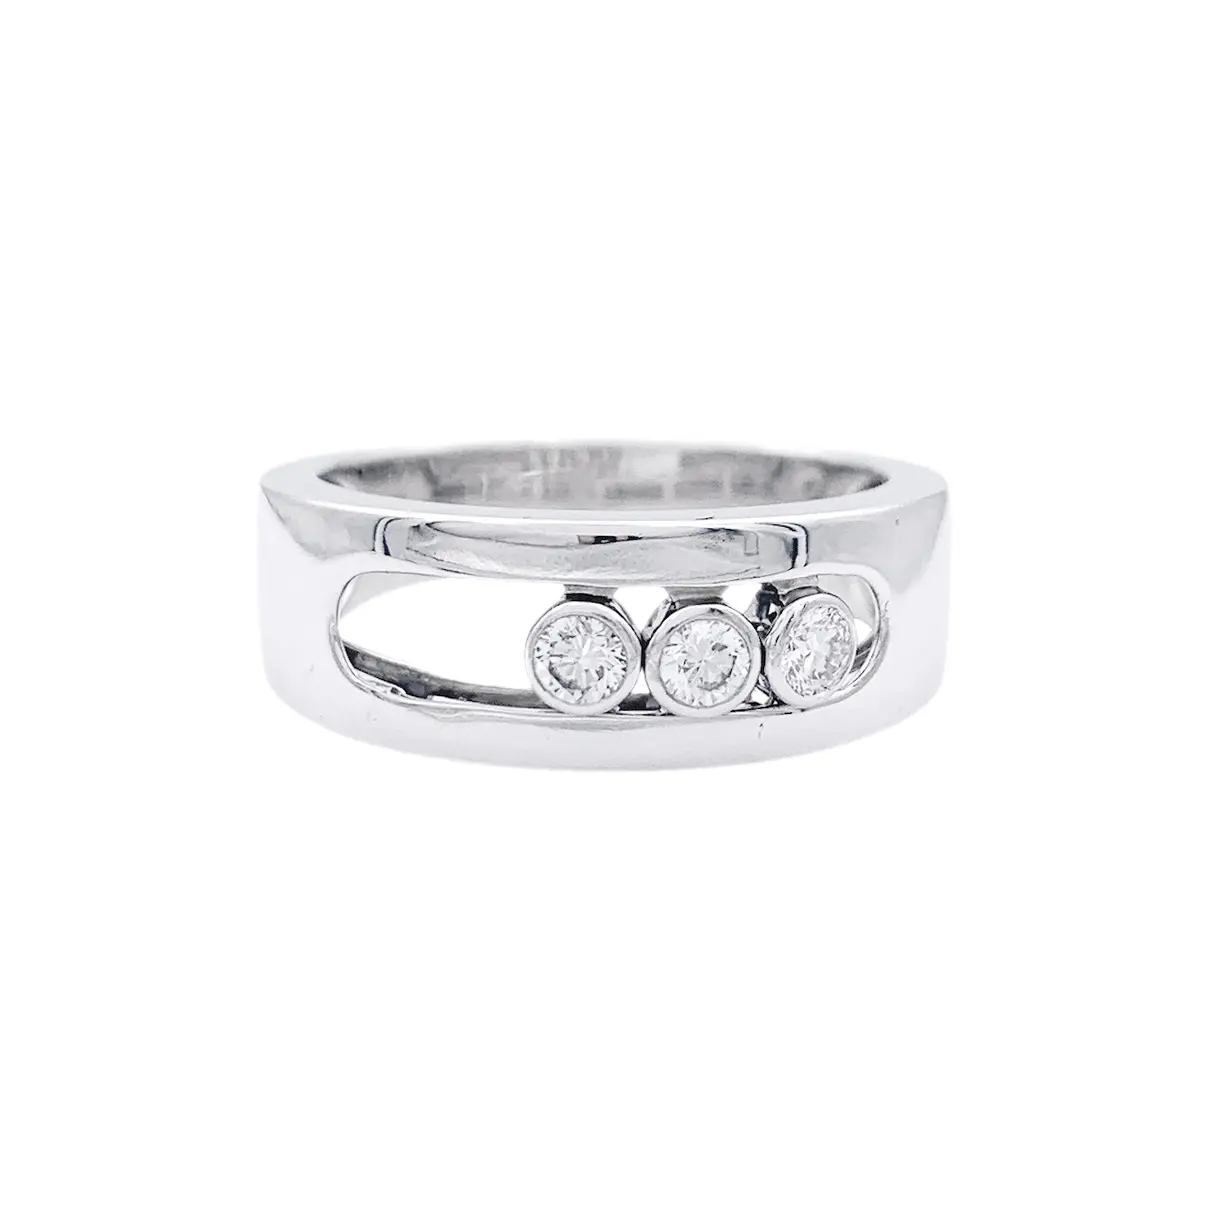 Move Joaillerie white gold ring